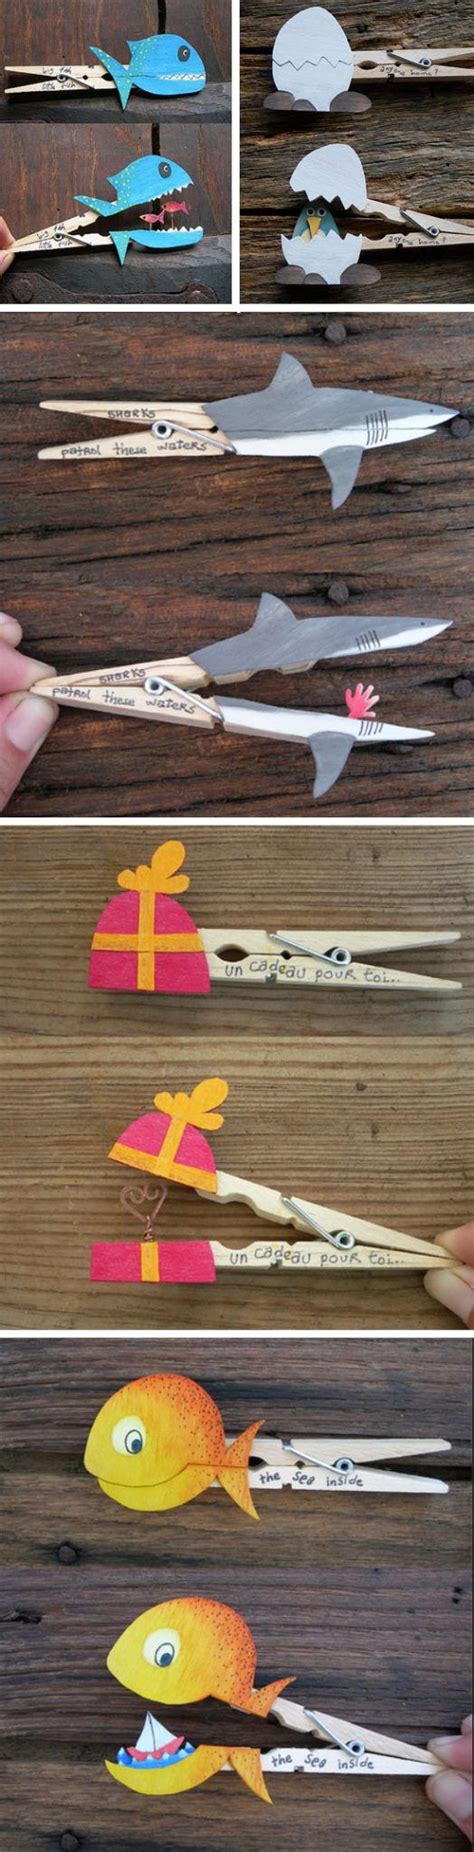 Clothes Peg Crafts 18 Diy Summer Art Projects For Kids